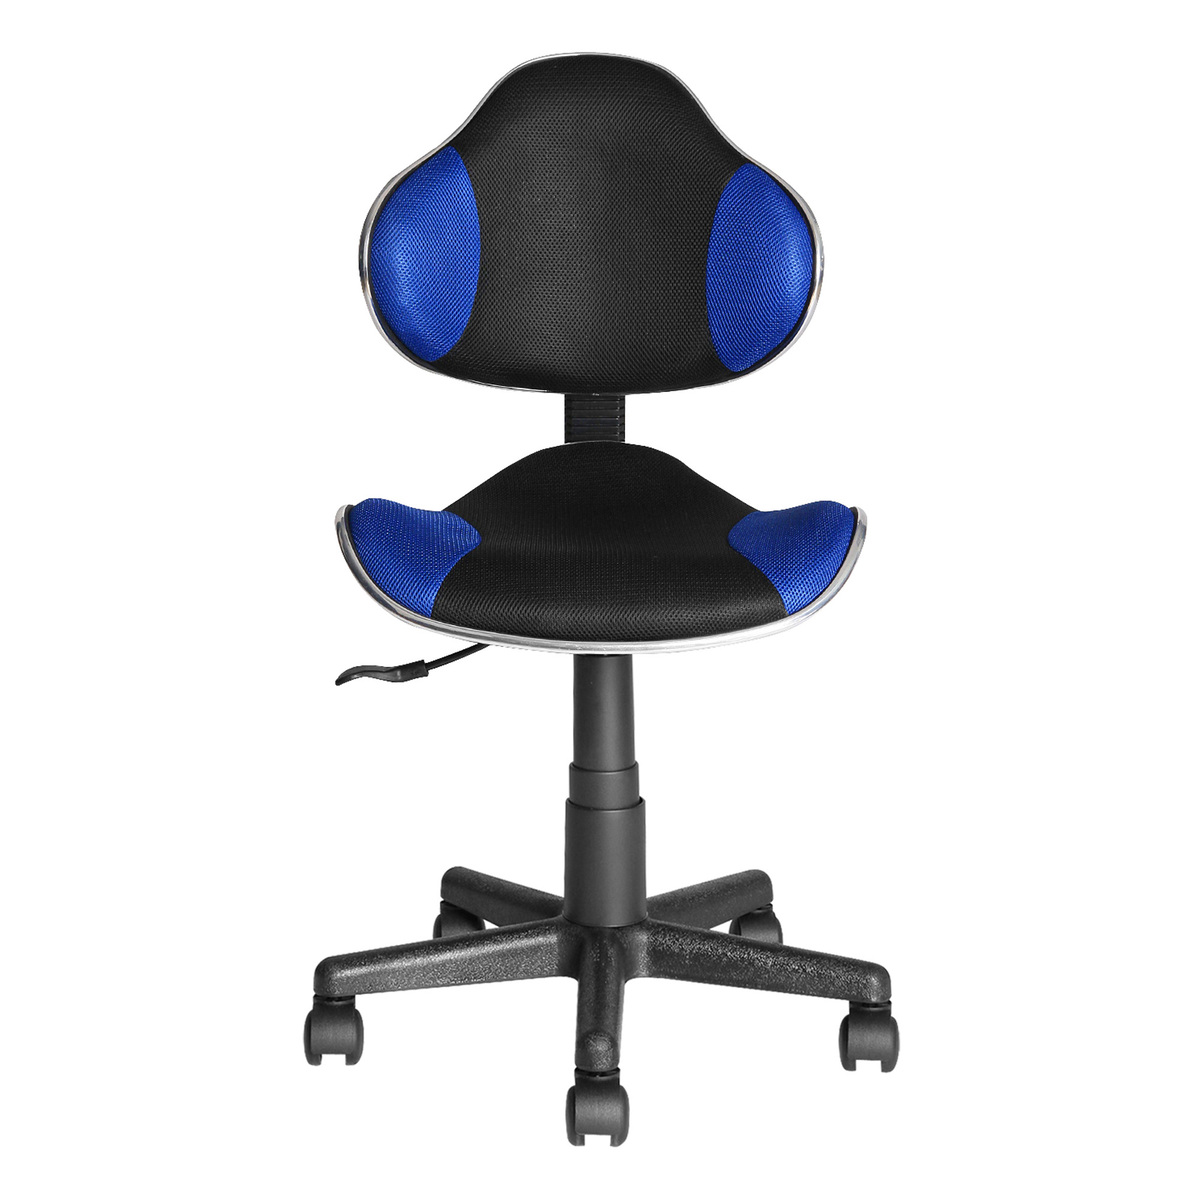 Maple Leaf Adjustable Kids Chair, Office, Computer Chair for Students With Swivel Wheels Black-Blue QZYG